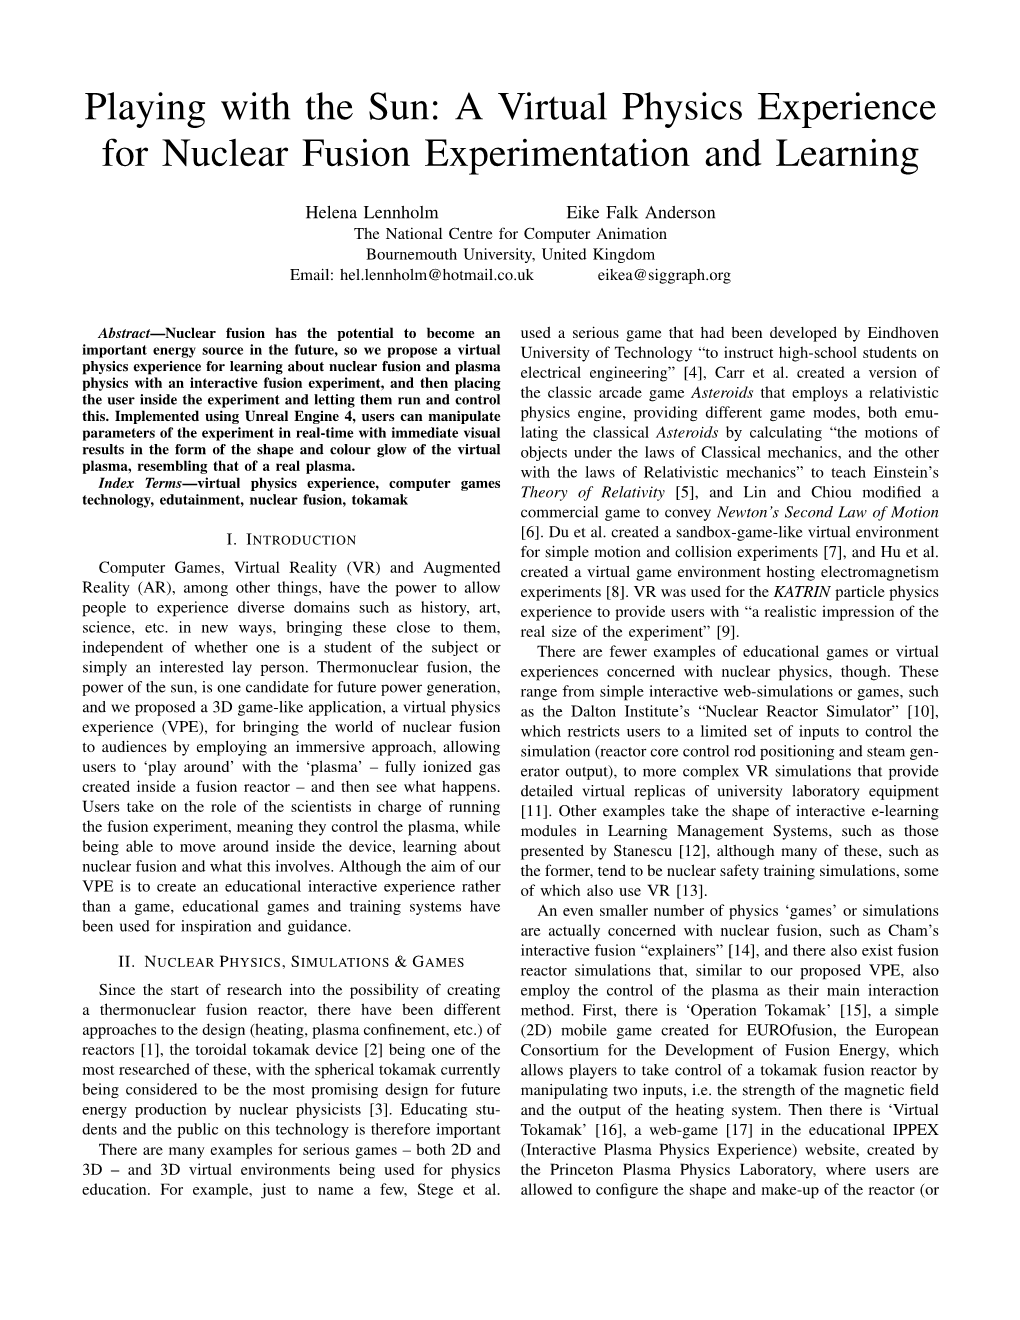 Playing with the Sun: a Virtual Physics Experience for Nuclear Fusion Experimentation and Learning